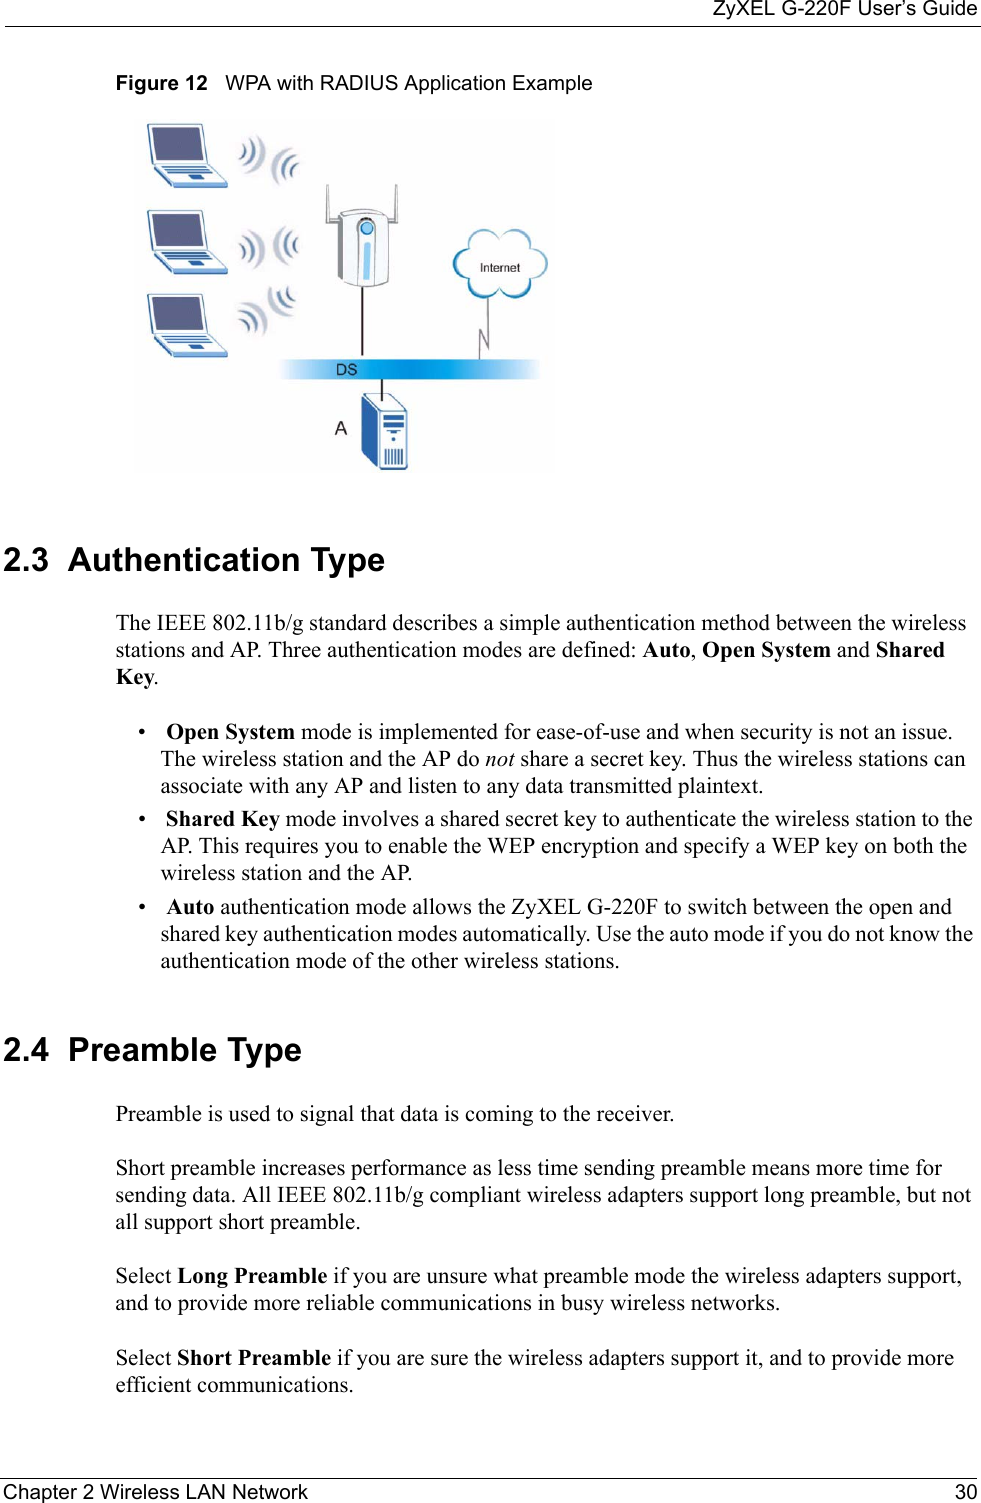 ZyXEL G-220F User’s GuideChapter 2 Wireless LAN Network 30Figure 12   WPA with RADIUS Application Example2.3  Authentication Type The IEEE 802.11b/g standard describes a simple authentication method between the wireless stations and AP. Three authentication modes are defined: Auto, Open System and Shared Key.• Open System mode is implemented for ease-of-use and when security is not an issue. The wireless station and the AP do not share a secret key. Thus the wireless stations can associate with any AP and listen to any data transmitted plaintext.• Shared Key mode involves a shared secret key to authenticate the wireless station to the AP. This requires you to enable the WEP encryption and specify a WEP key on both the wireless station and the AP. • Auto authentication mode allows the ZyXEL G-220F to switch between the open and shared key authentication modes automatically. Use the auto mode if you do not know the authentication mode of the other wireless stations.2.4  Preamble TypePreamble is used to signal that data is coming to the receiver.  Short preamble increases performance as less time sending preamble means more time for sending data. All IEEE 802.11b/g compliant wireless adapters support long preamble, but not all support short preamble. Select Long Preamble if you are unsure what preamble mode the wireless adapters support, and to provide more reliable communications in busy wireless networks. Select Short Preamble if you are sure the wireless adapters support it, and to provide more efficient communications.